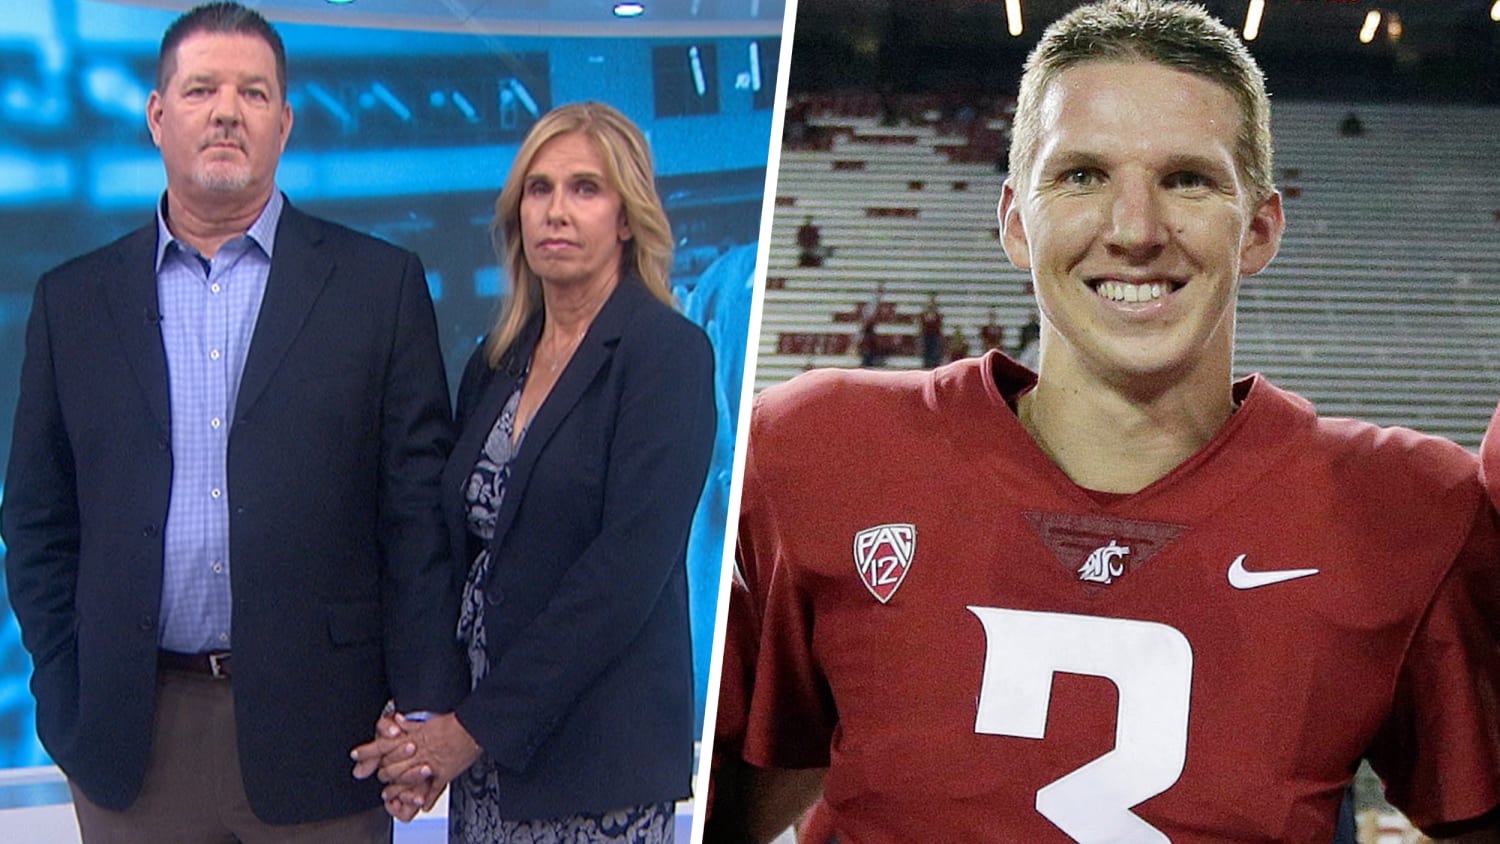 College Football Quarterback Tyler Hilinski Who Died By Suicide Had Cte Reveals Family